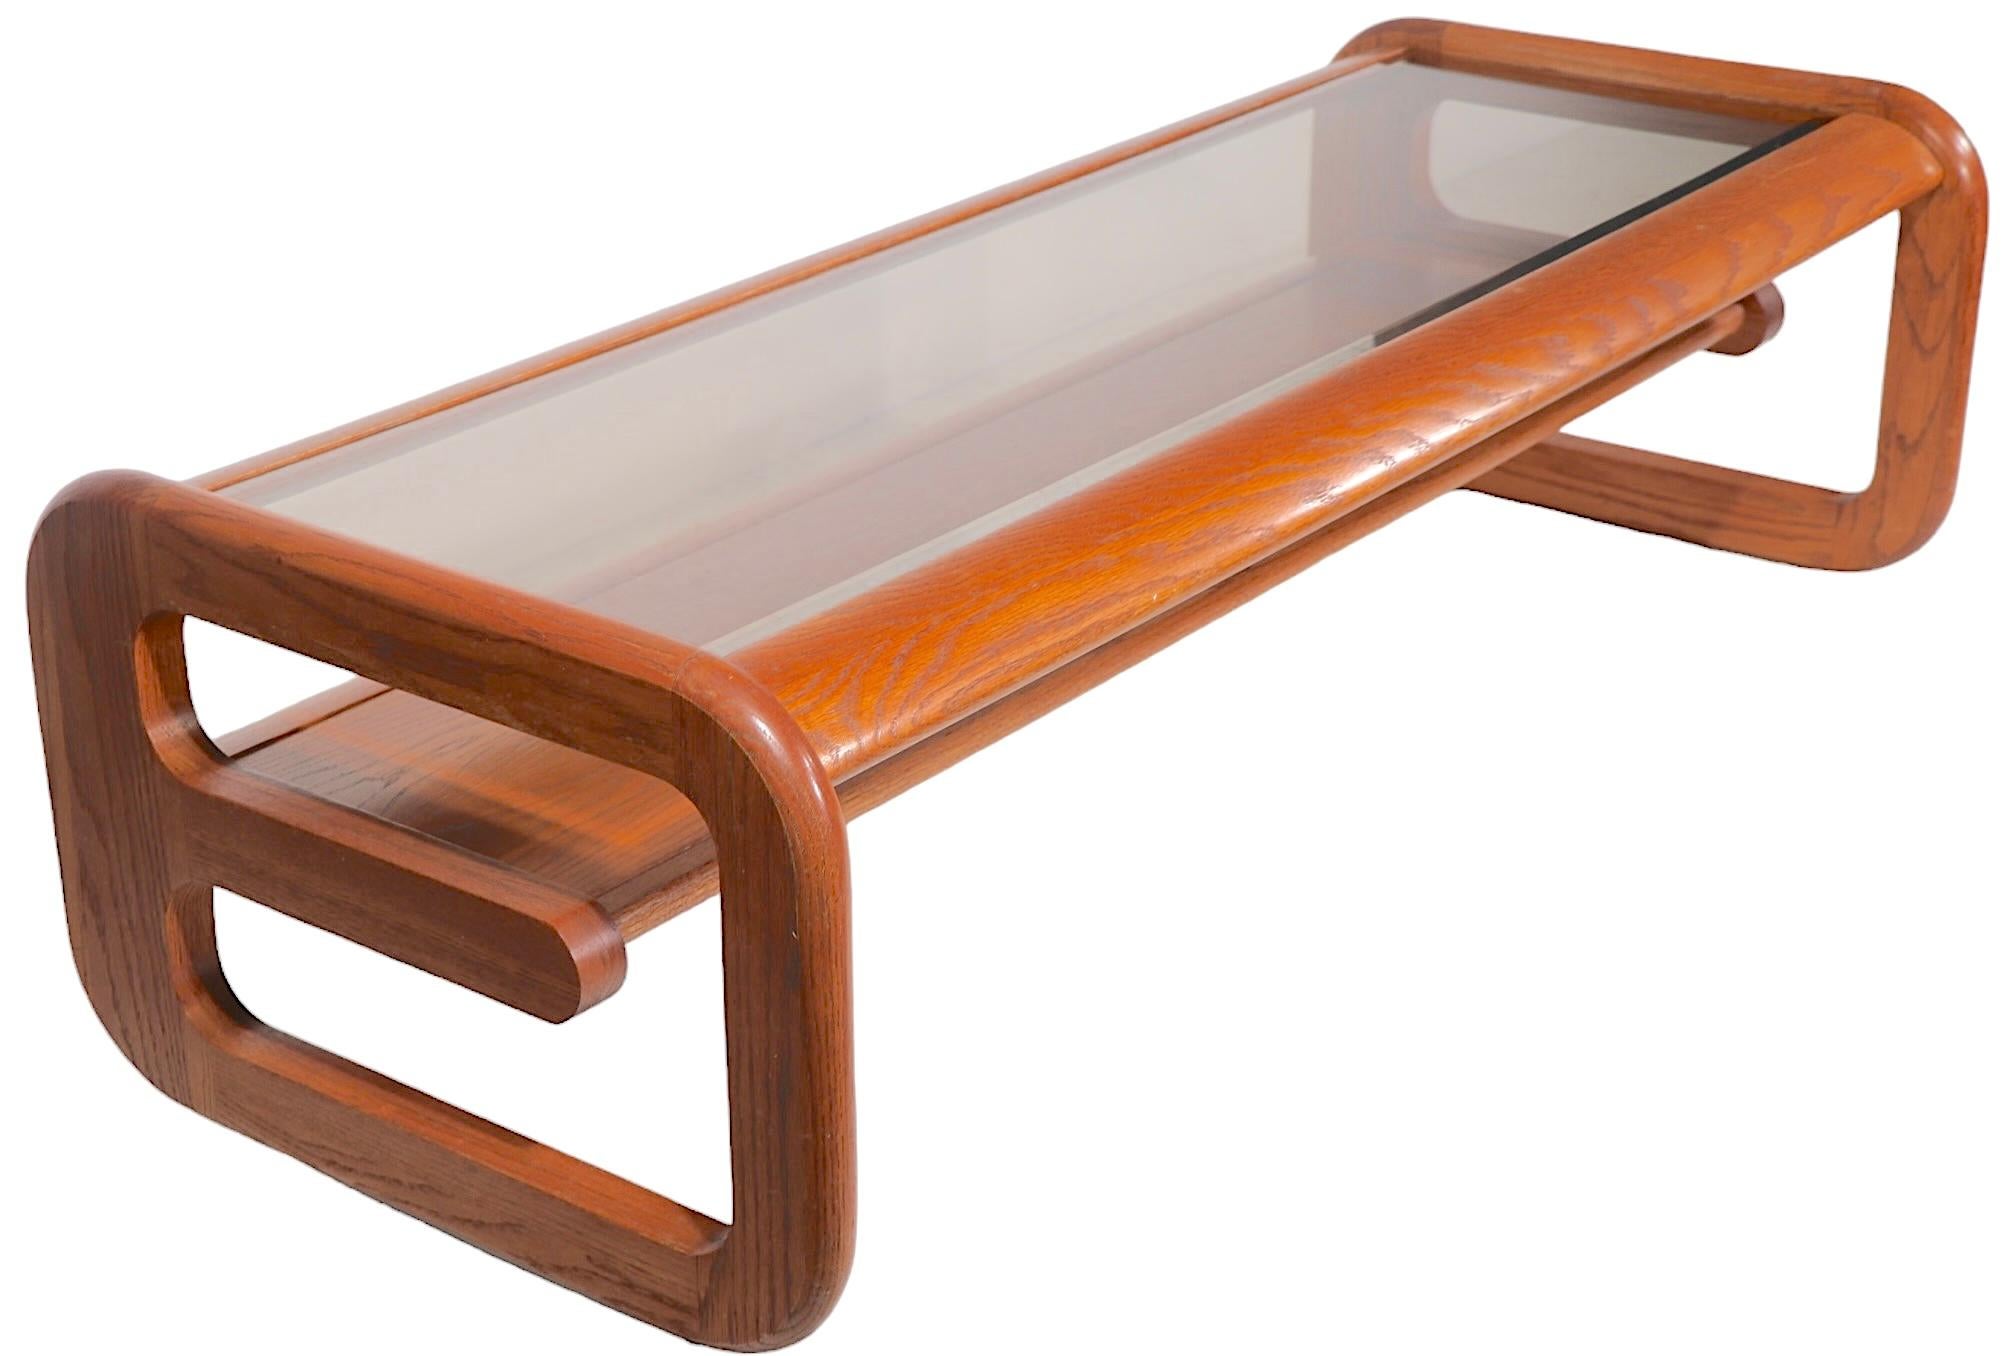  Post Modern Oak and Glass Coffee Table by Lou Hodges for Mersman  c. 1970's For Sale 4